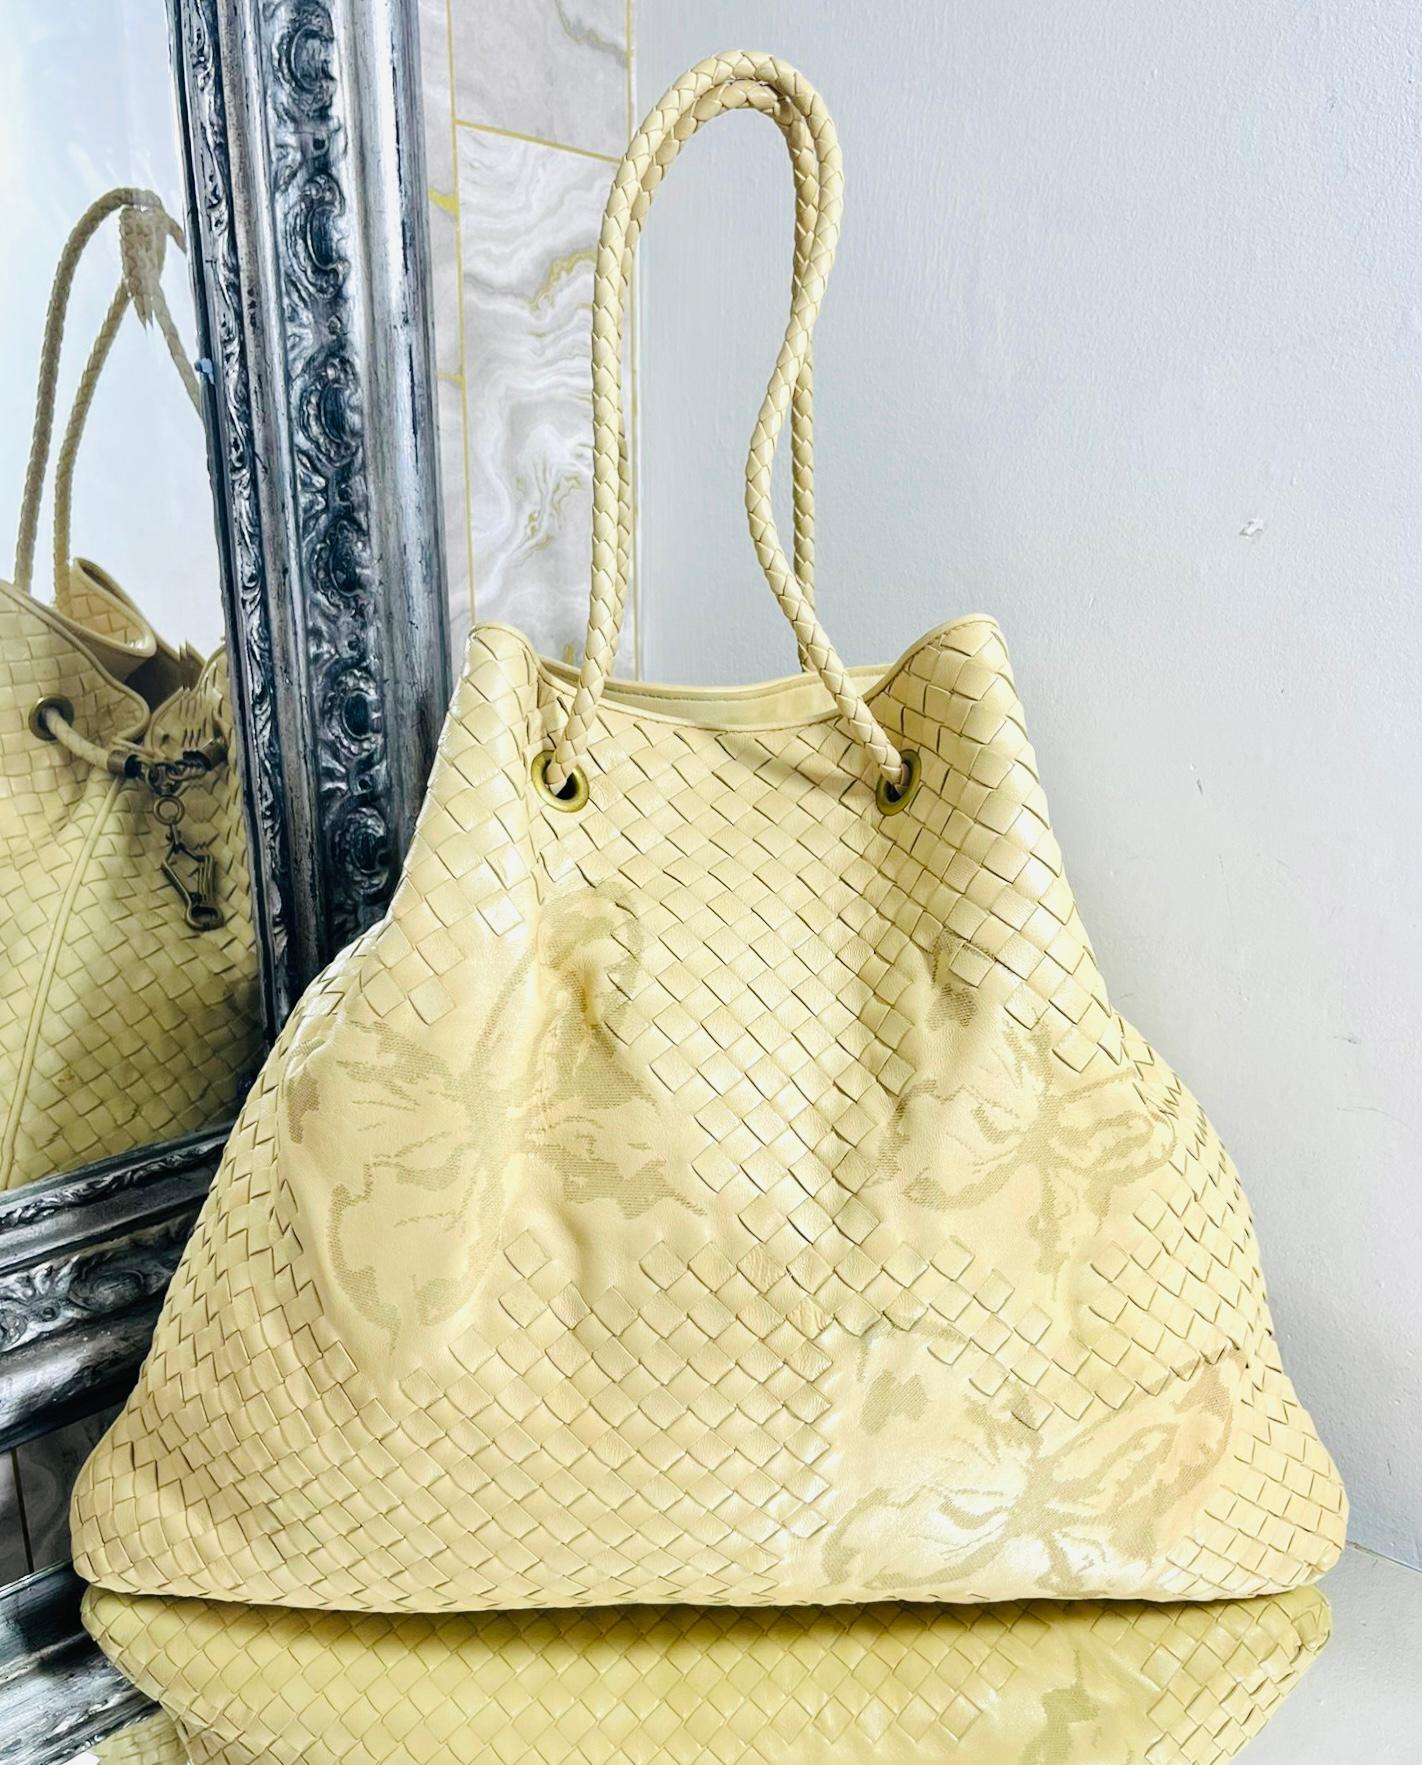 Bottega Veneta Butterfly Embossed Woven Leather Bag

Beige, trapezium shaped tote bag embellished with butterfly embossed motif.

Detailed with aged gold hardware, attached key ring and woven dual handles.

Featuring blue suede interior with slit